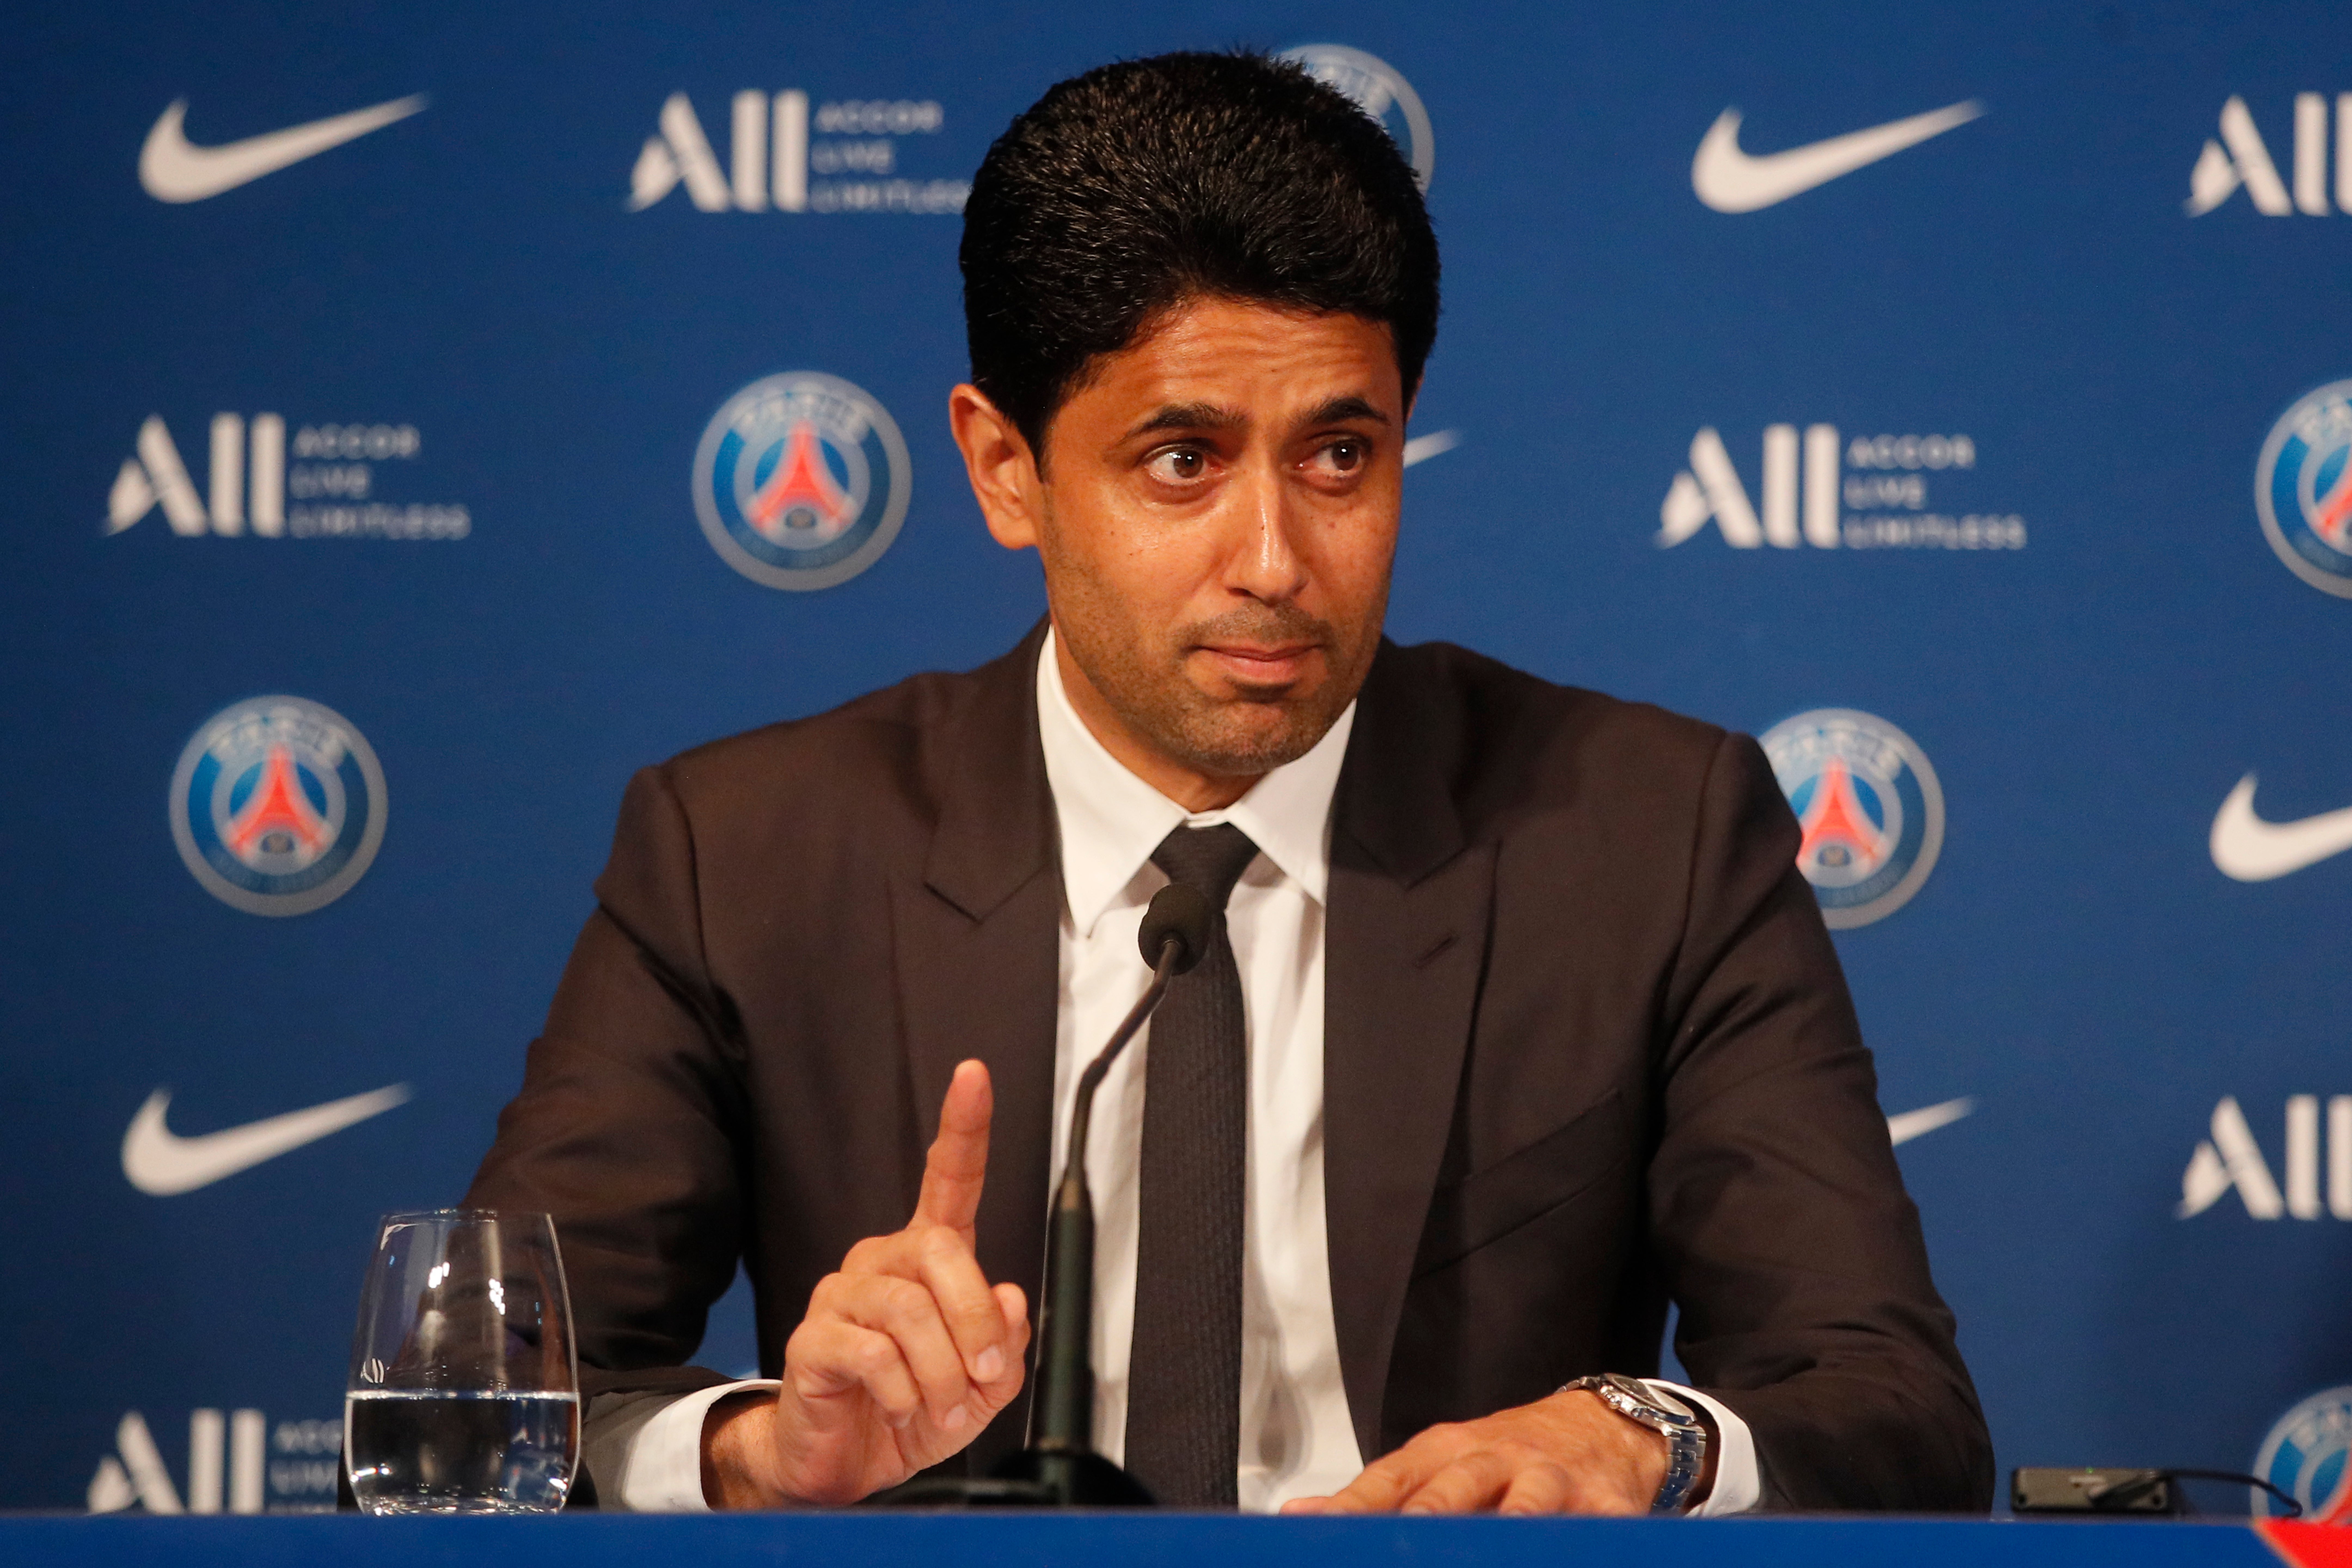 PSG president Nasser Al-Khelaifi has become one of the most powerful figures in the game